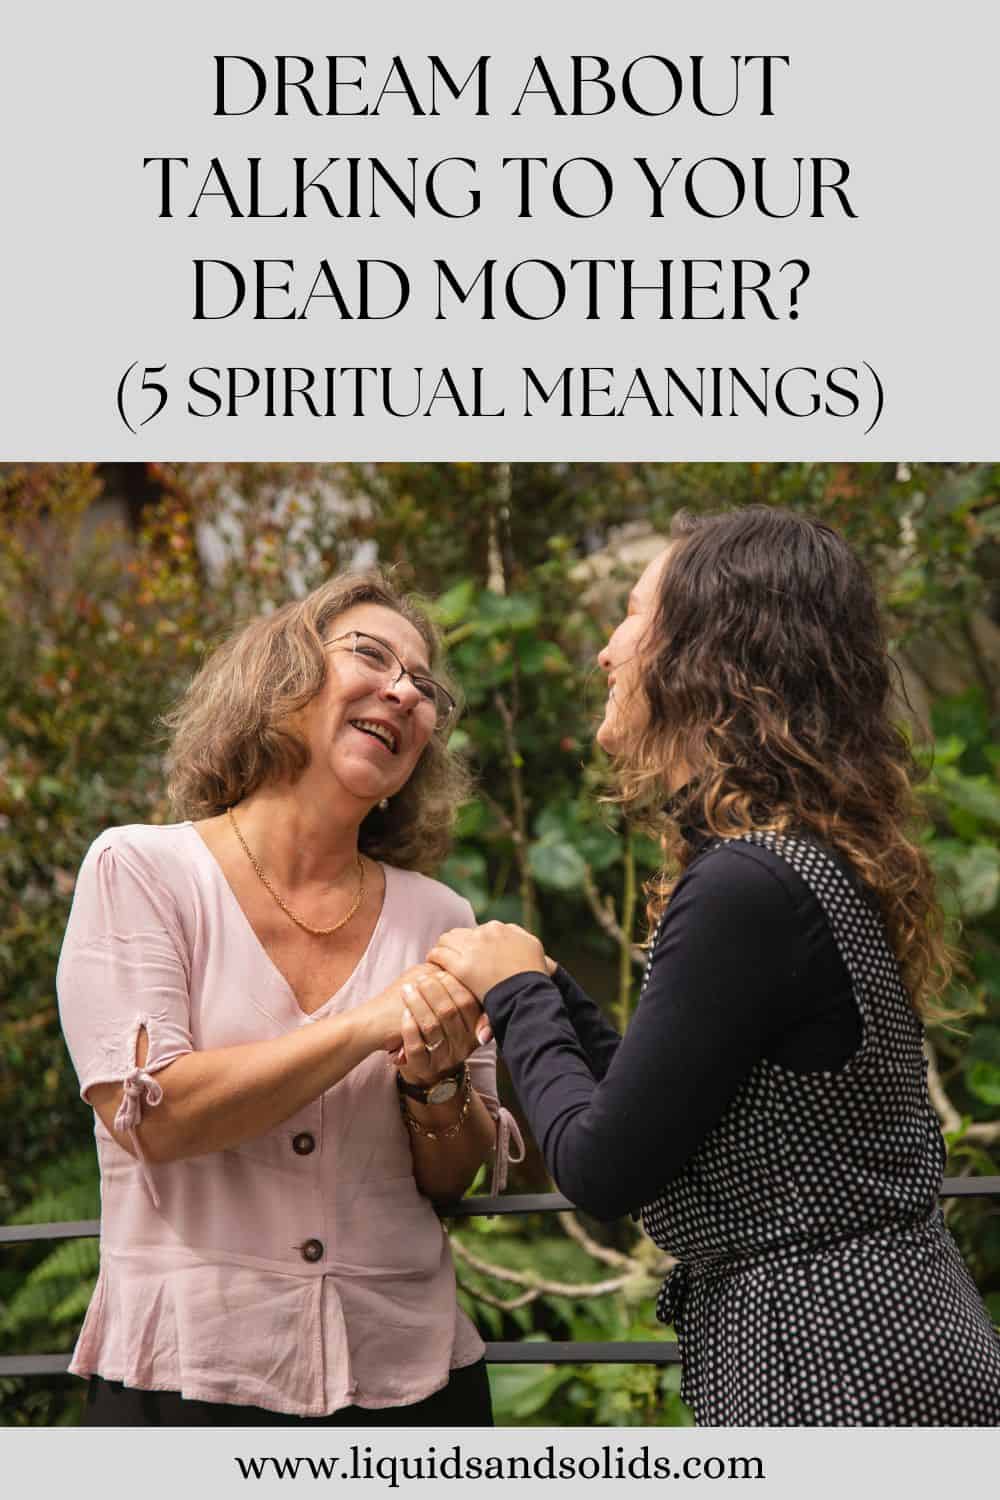 Dream About Talking To Your Dead Mother? (5 Spiritual Meanings)